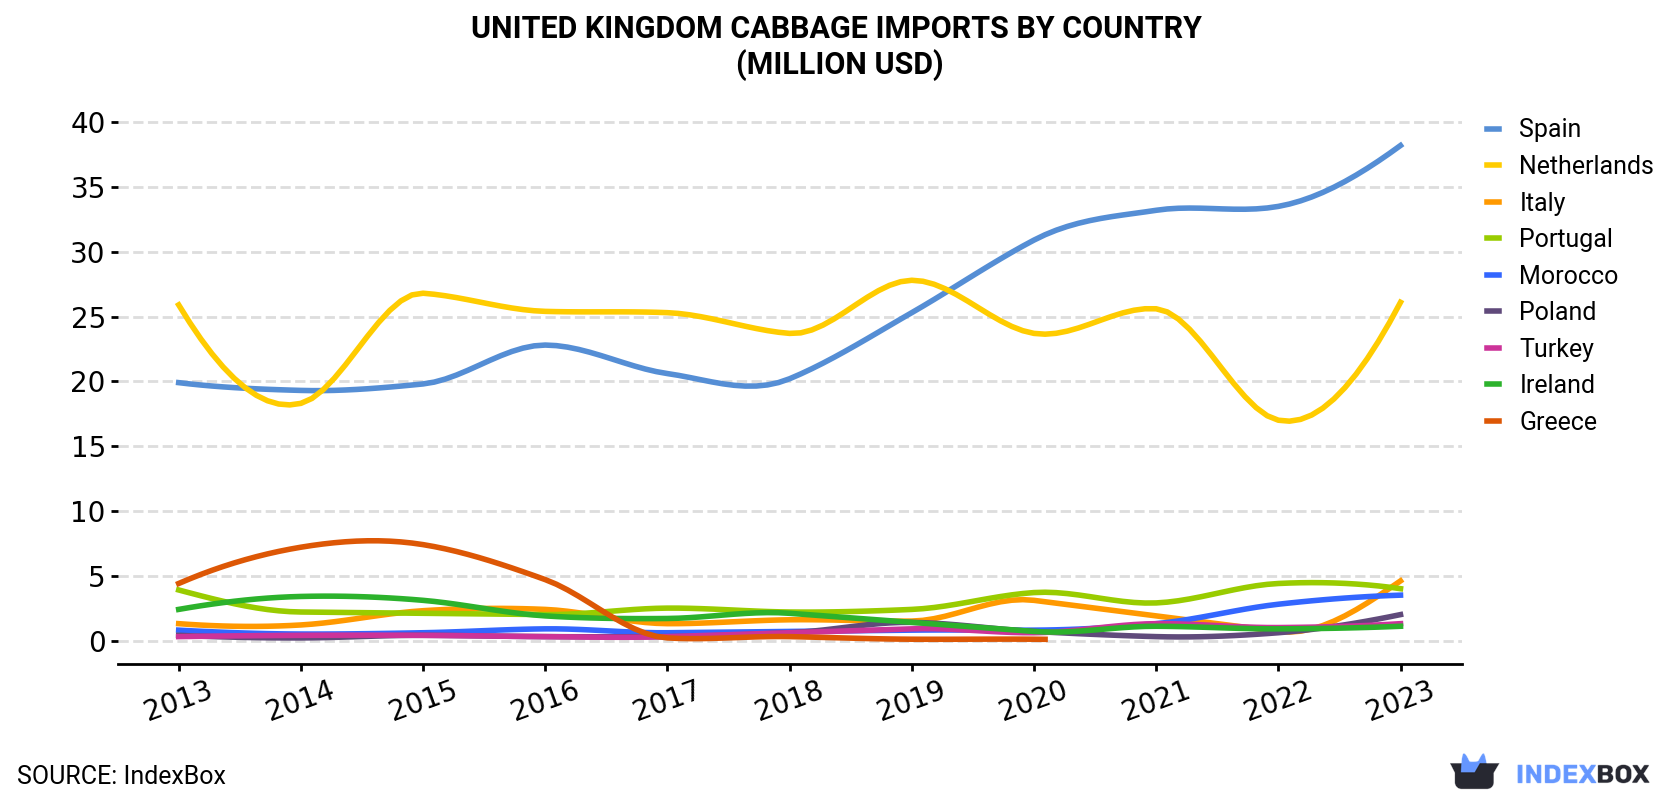 United Kingdom Cabbage Imports By Country (Million USD)